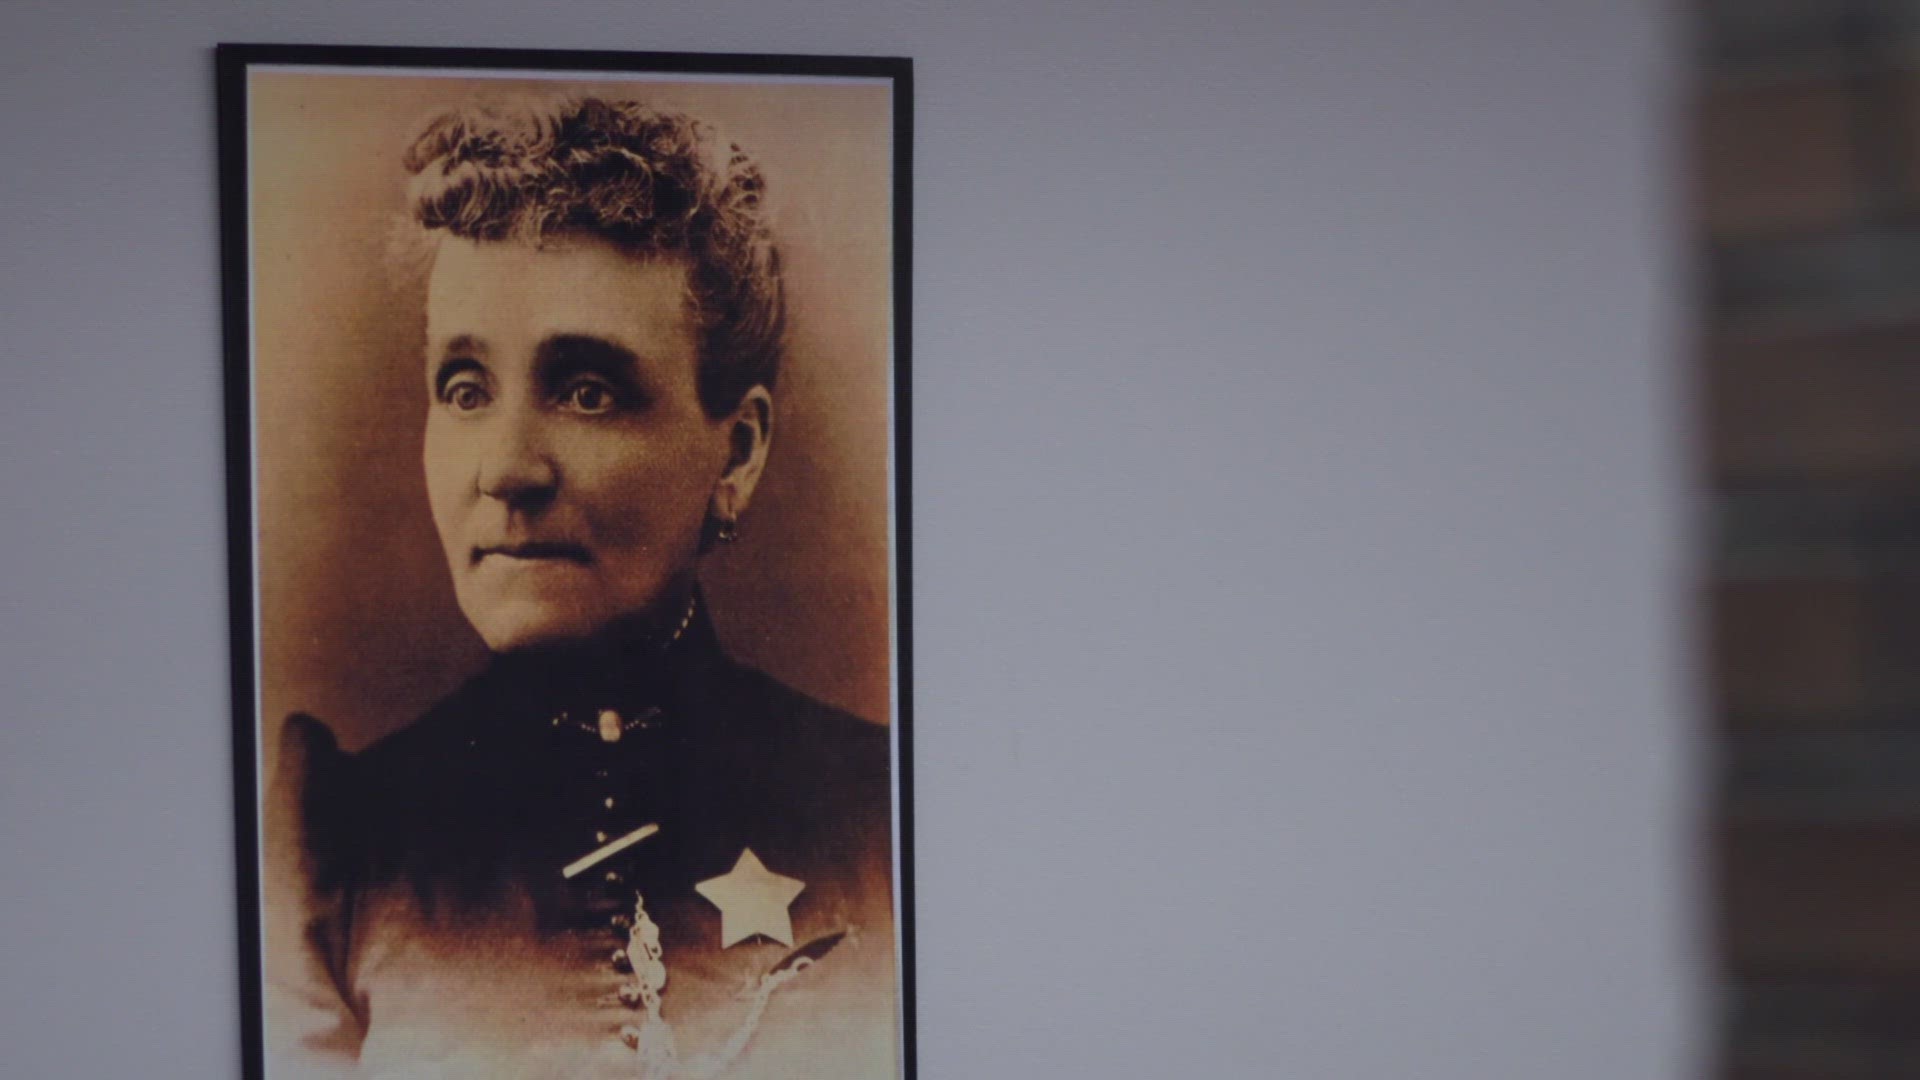 Sadie Likens joined the police department in 1888 to help women in the prison.